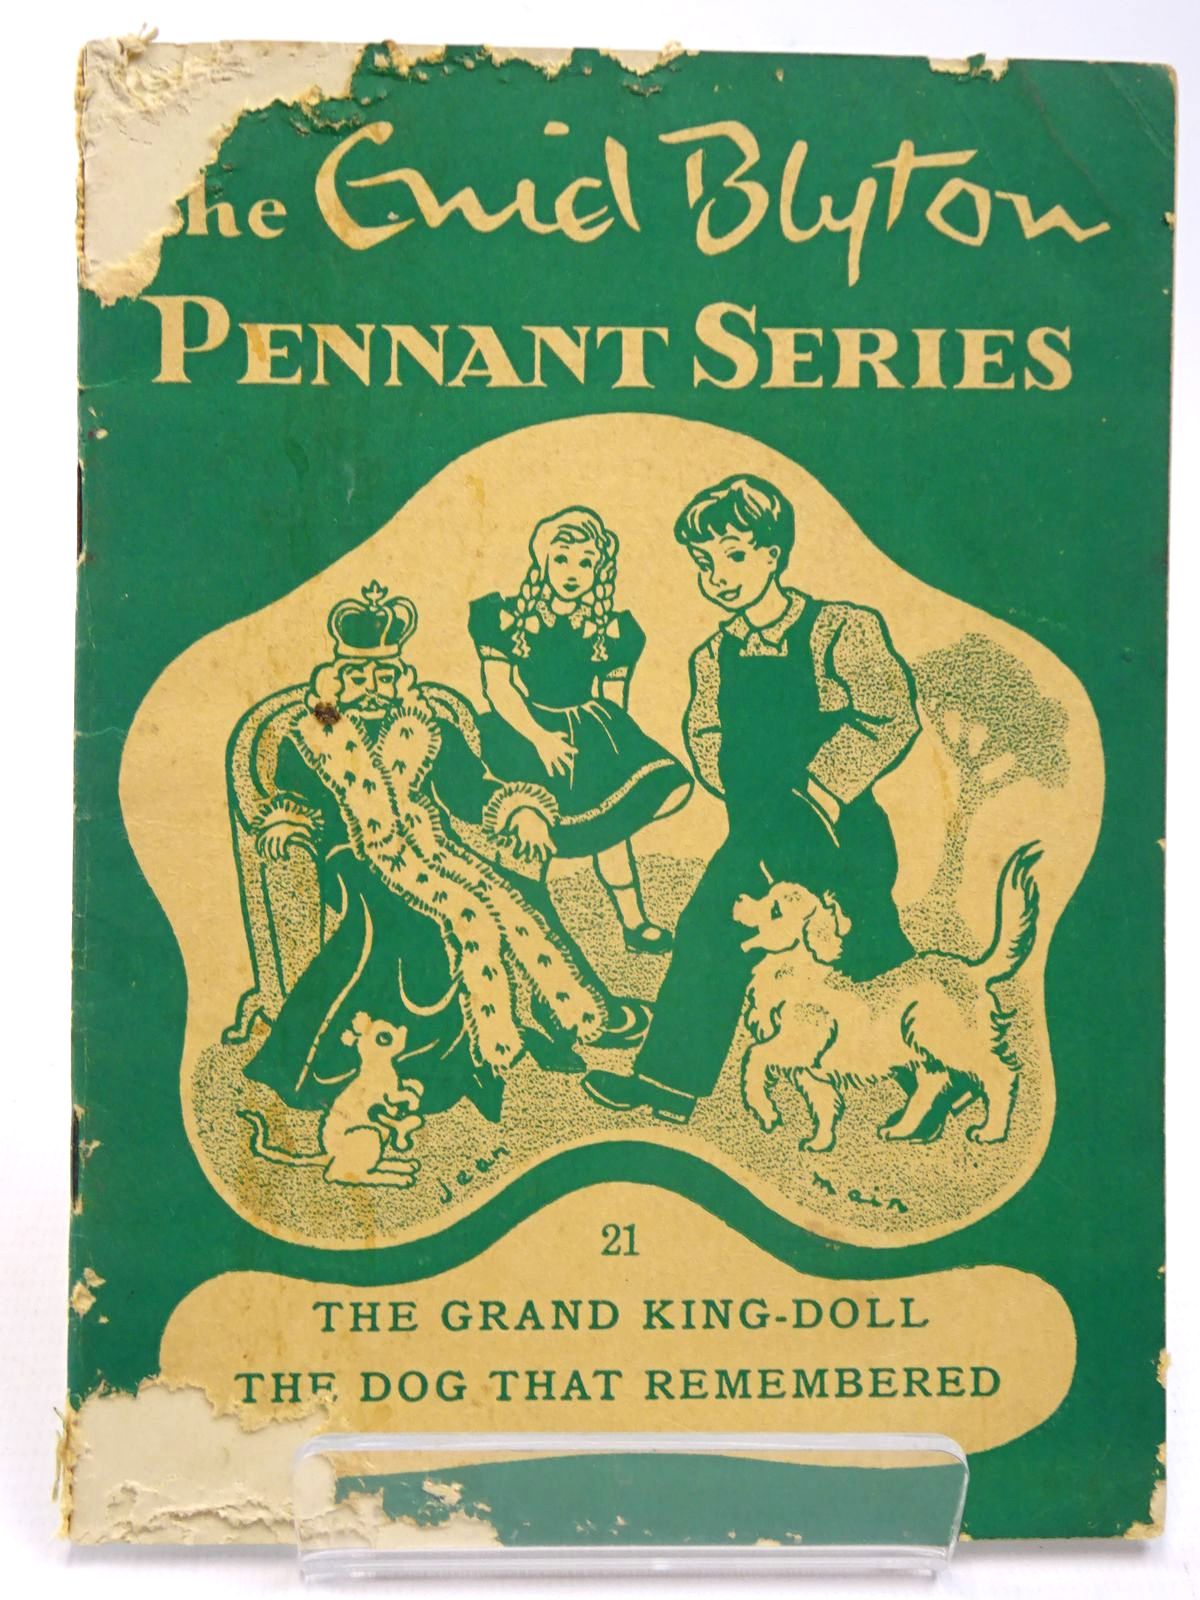 Photo of THE ENID BLYTON PENNANT SERIES No. 21 THE GRAND KING-DOLL / THE DOG THAT REMEMBERED written by Blyton, Enid illustrated by Soper, Eileen
Main, Jean published by Macmillan & Co. Ltd. (STOCK CODE: 2130533)  for sale by Stella & Rose's Books